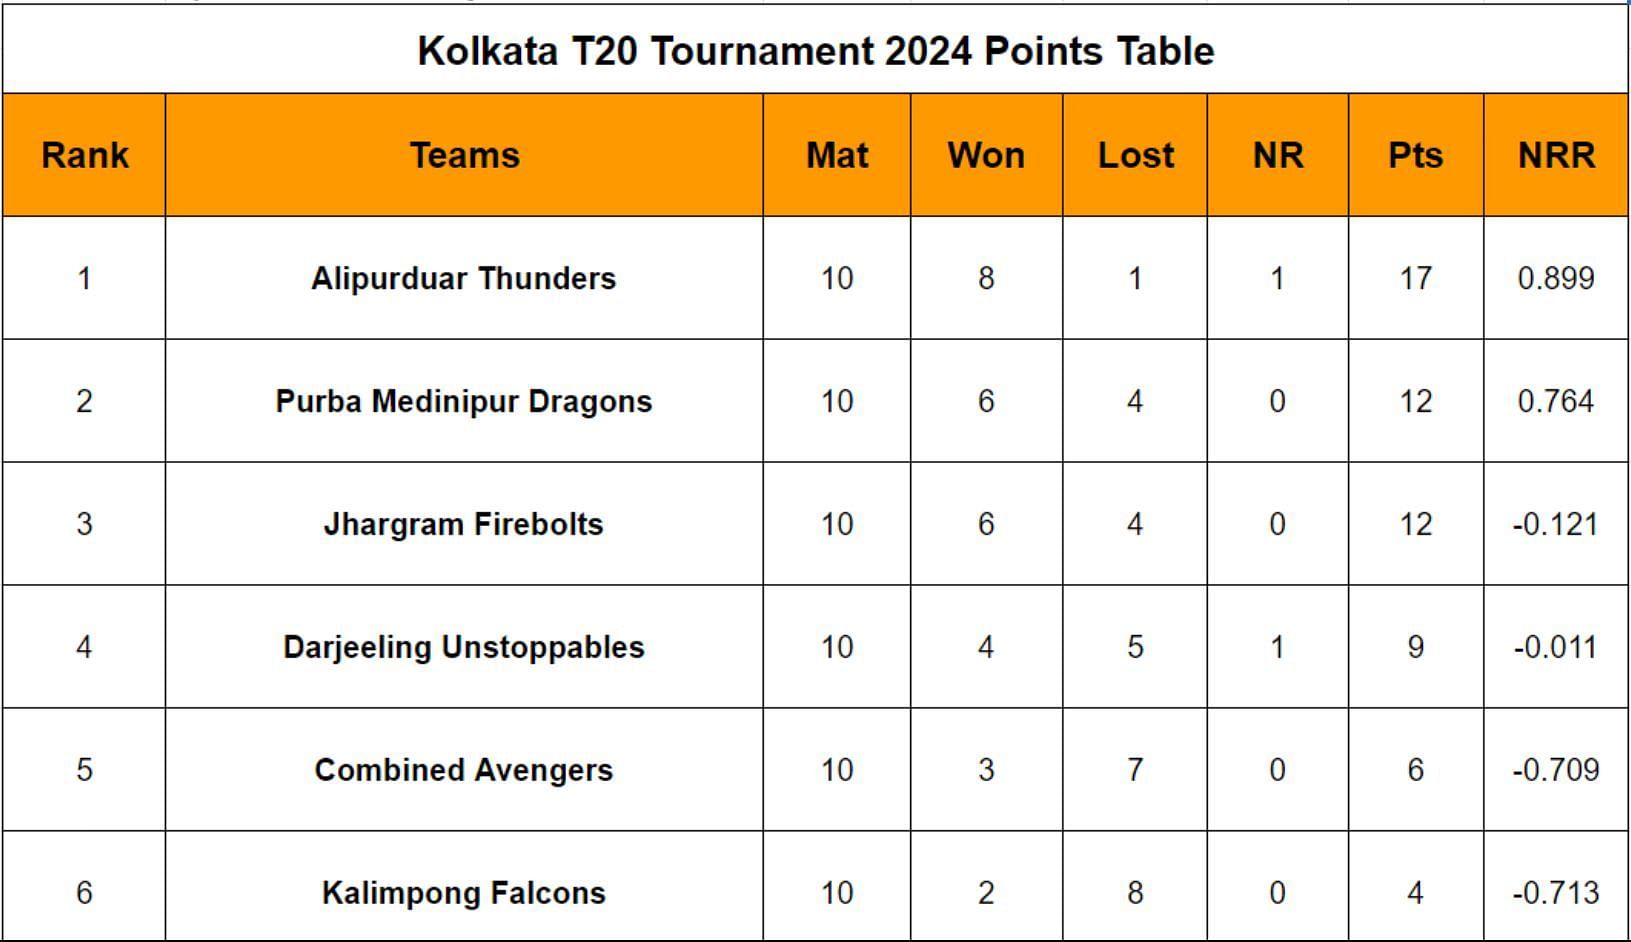 Kolkata T20 Tournament 2024 Points Table Updated after Match 30